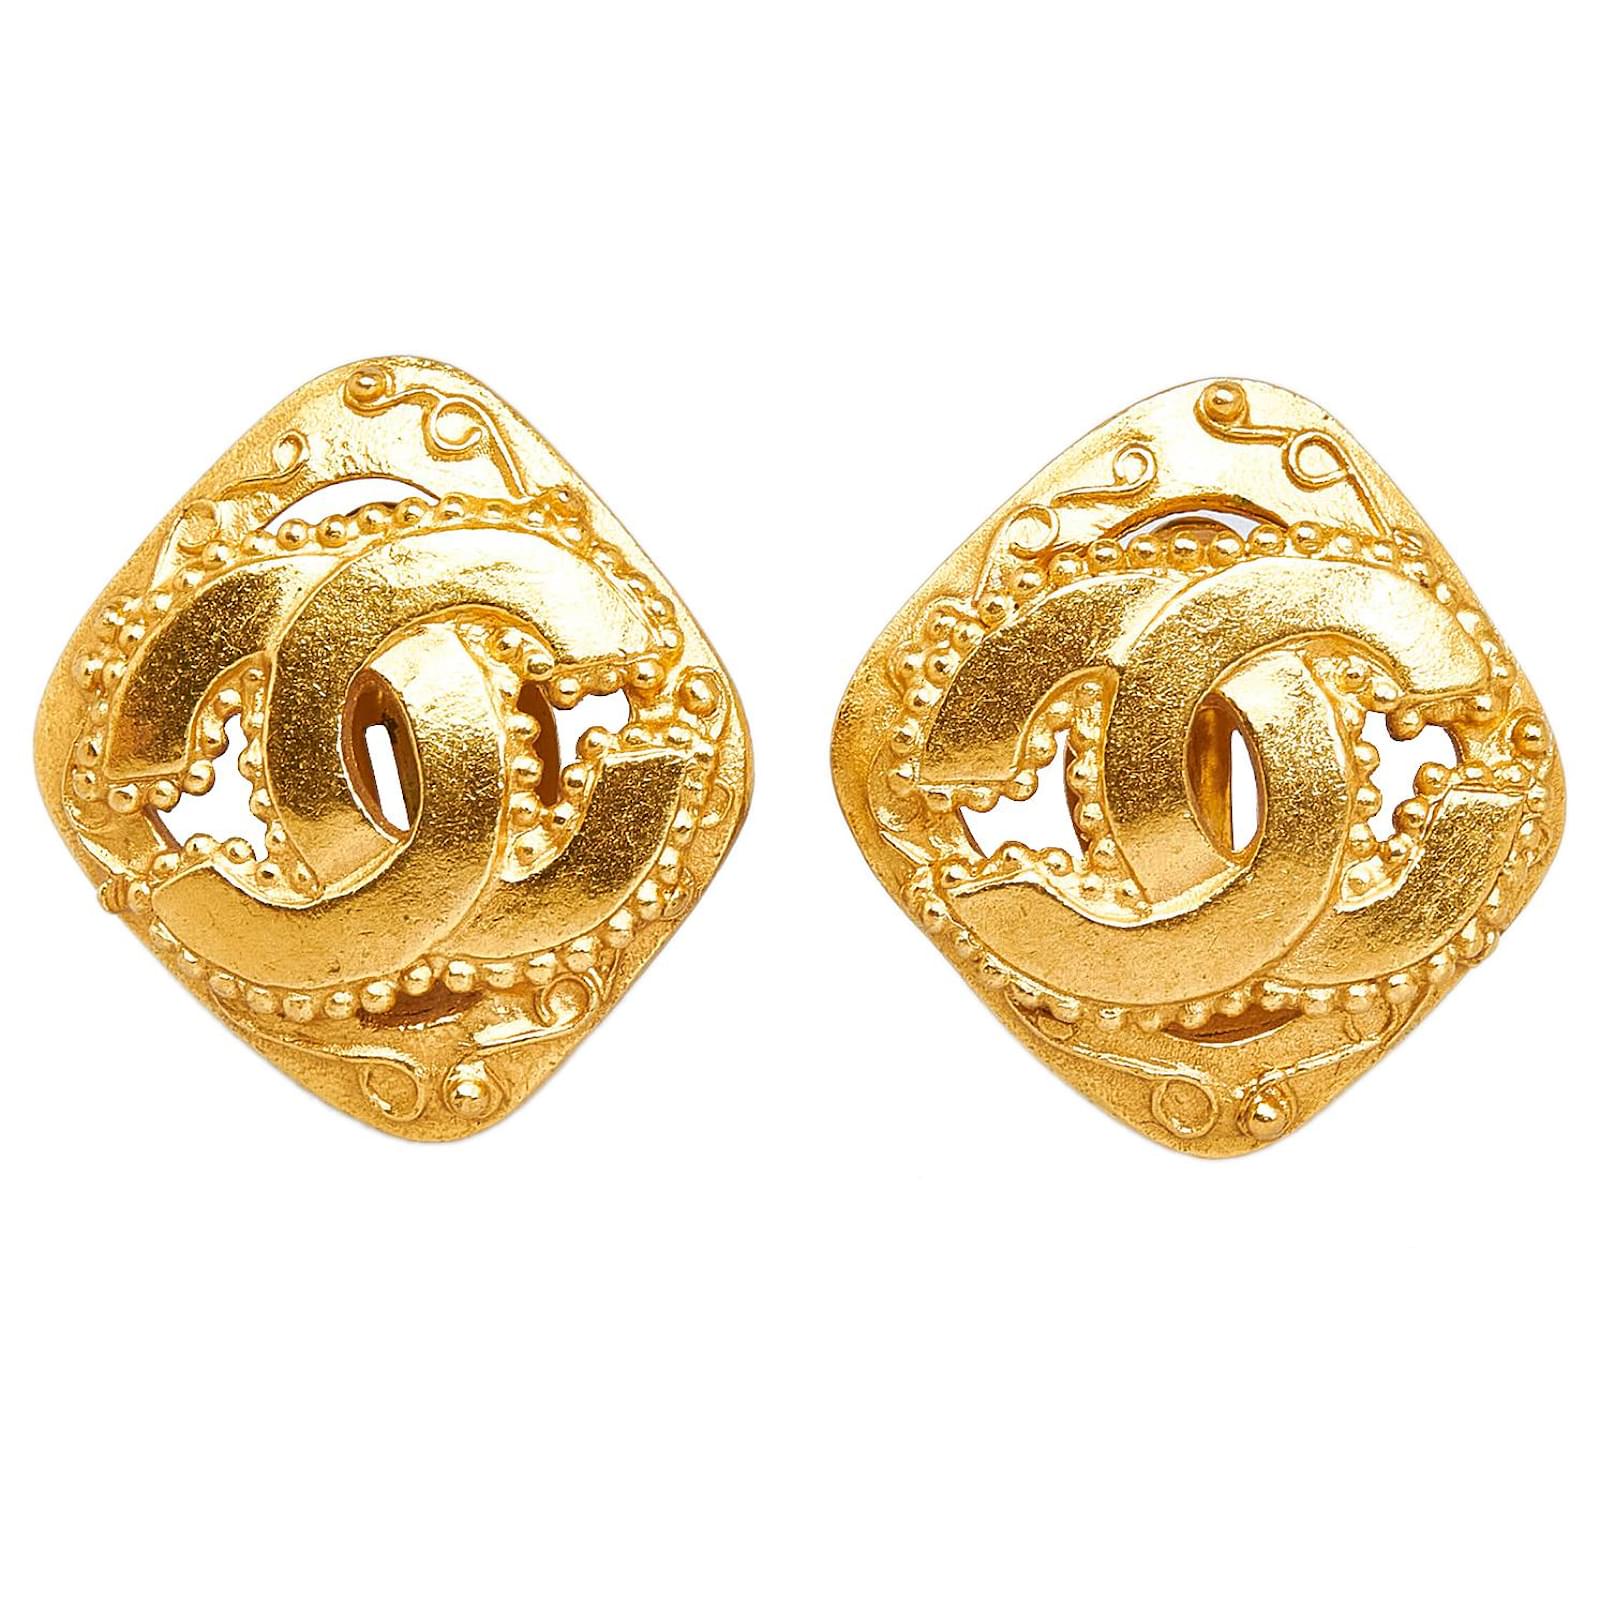 CHANEL Vintage Earrings Coco Mark Heart Gold Plated Authentic 